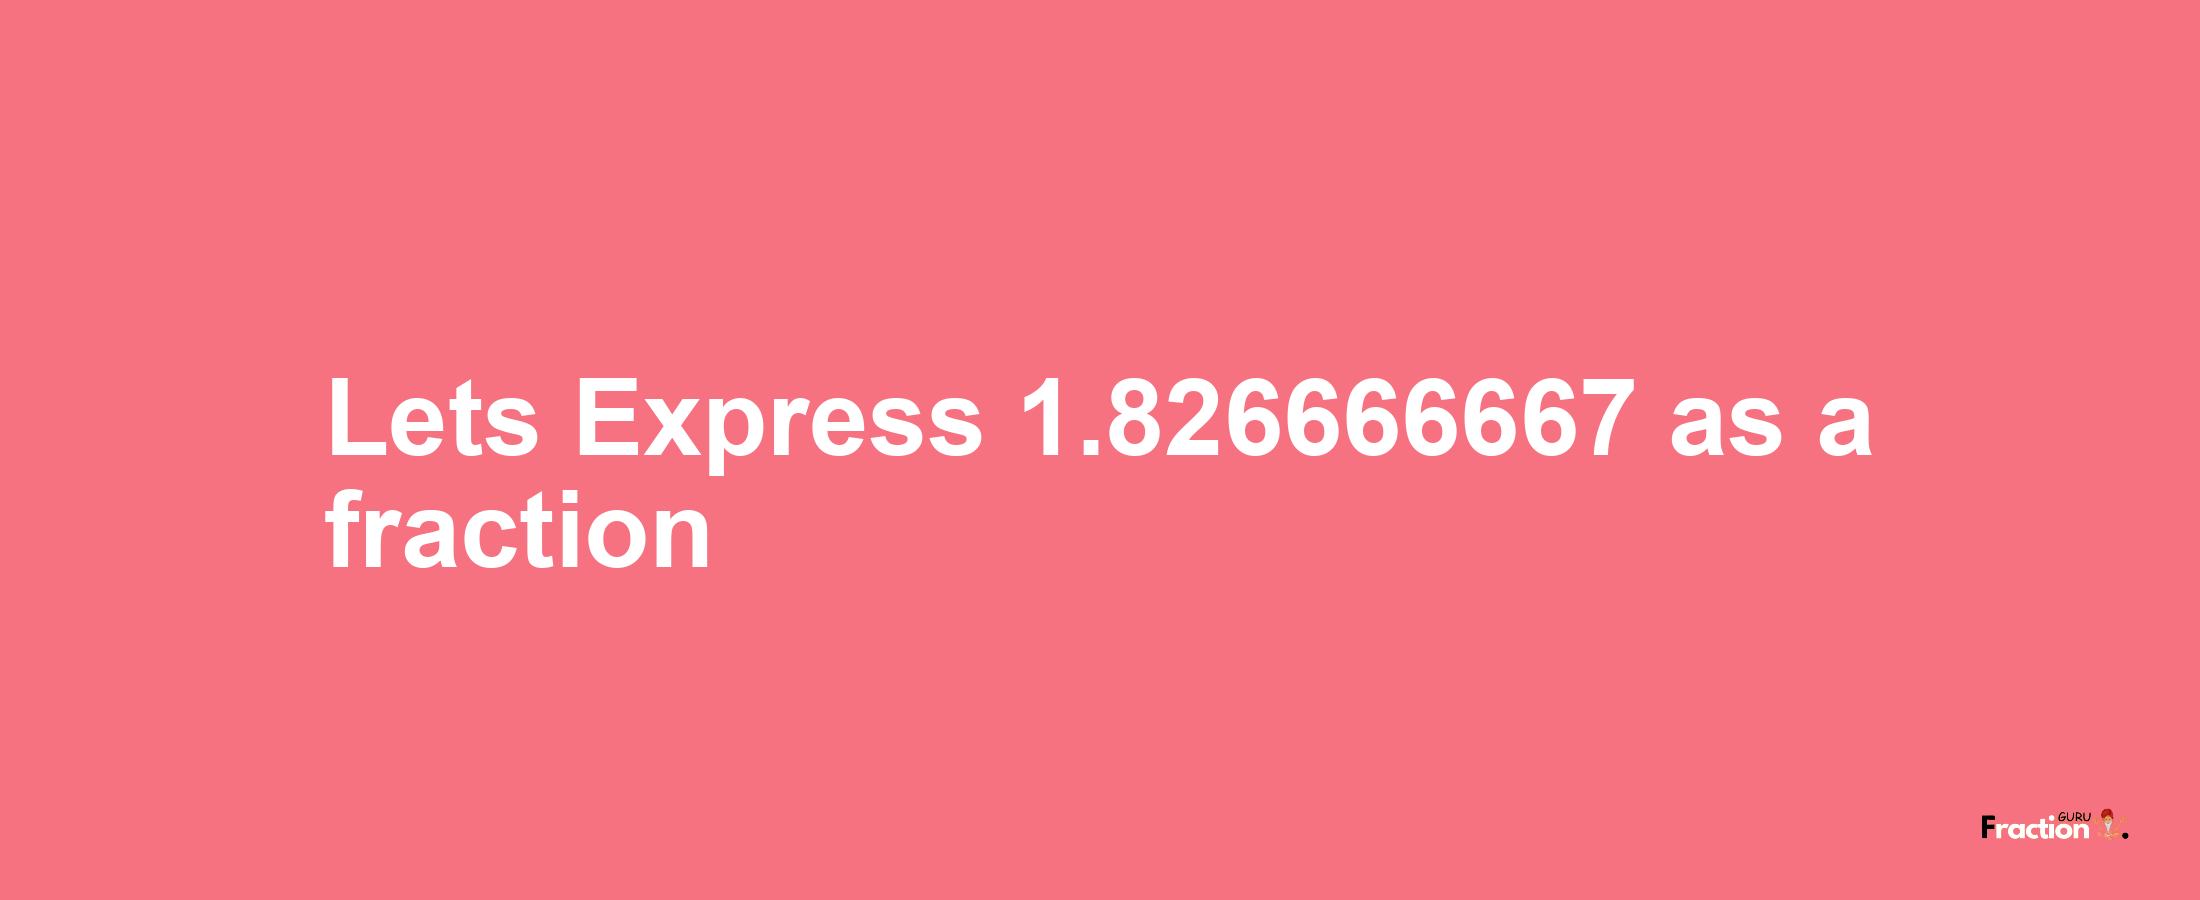 Lets Express 1.826666667 as afraction